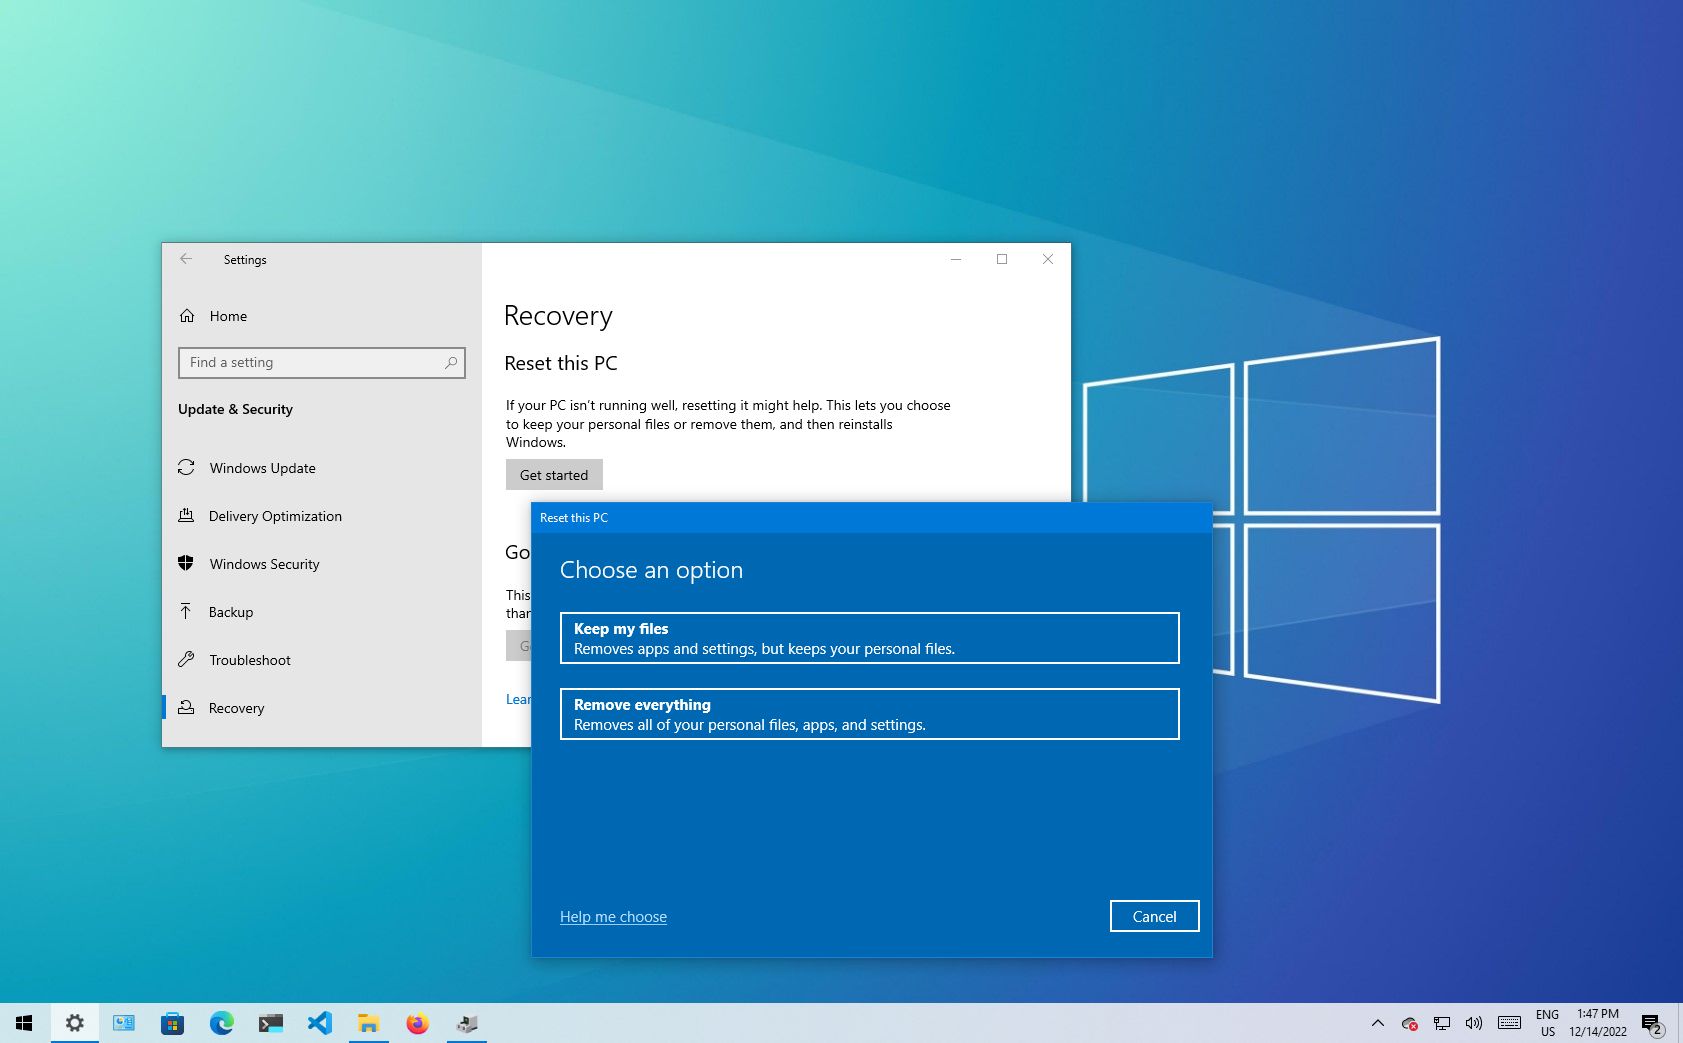 Step-by-Step Guide on How to Factory Reset Windows 10 - Post-Reset Considerations